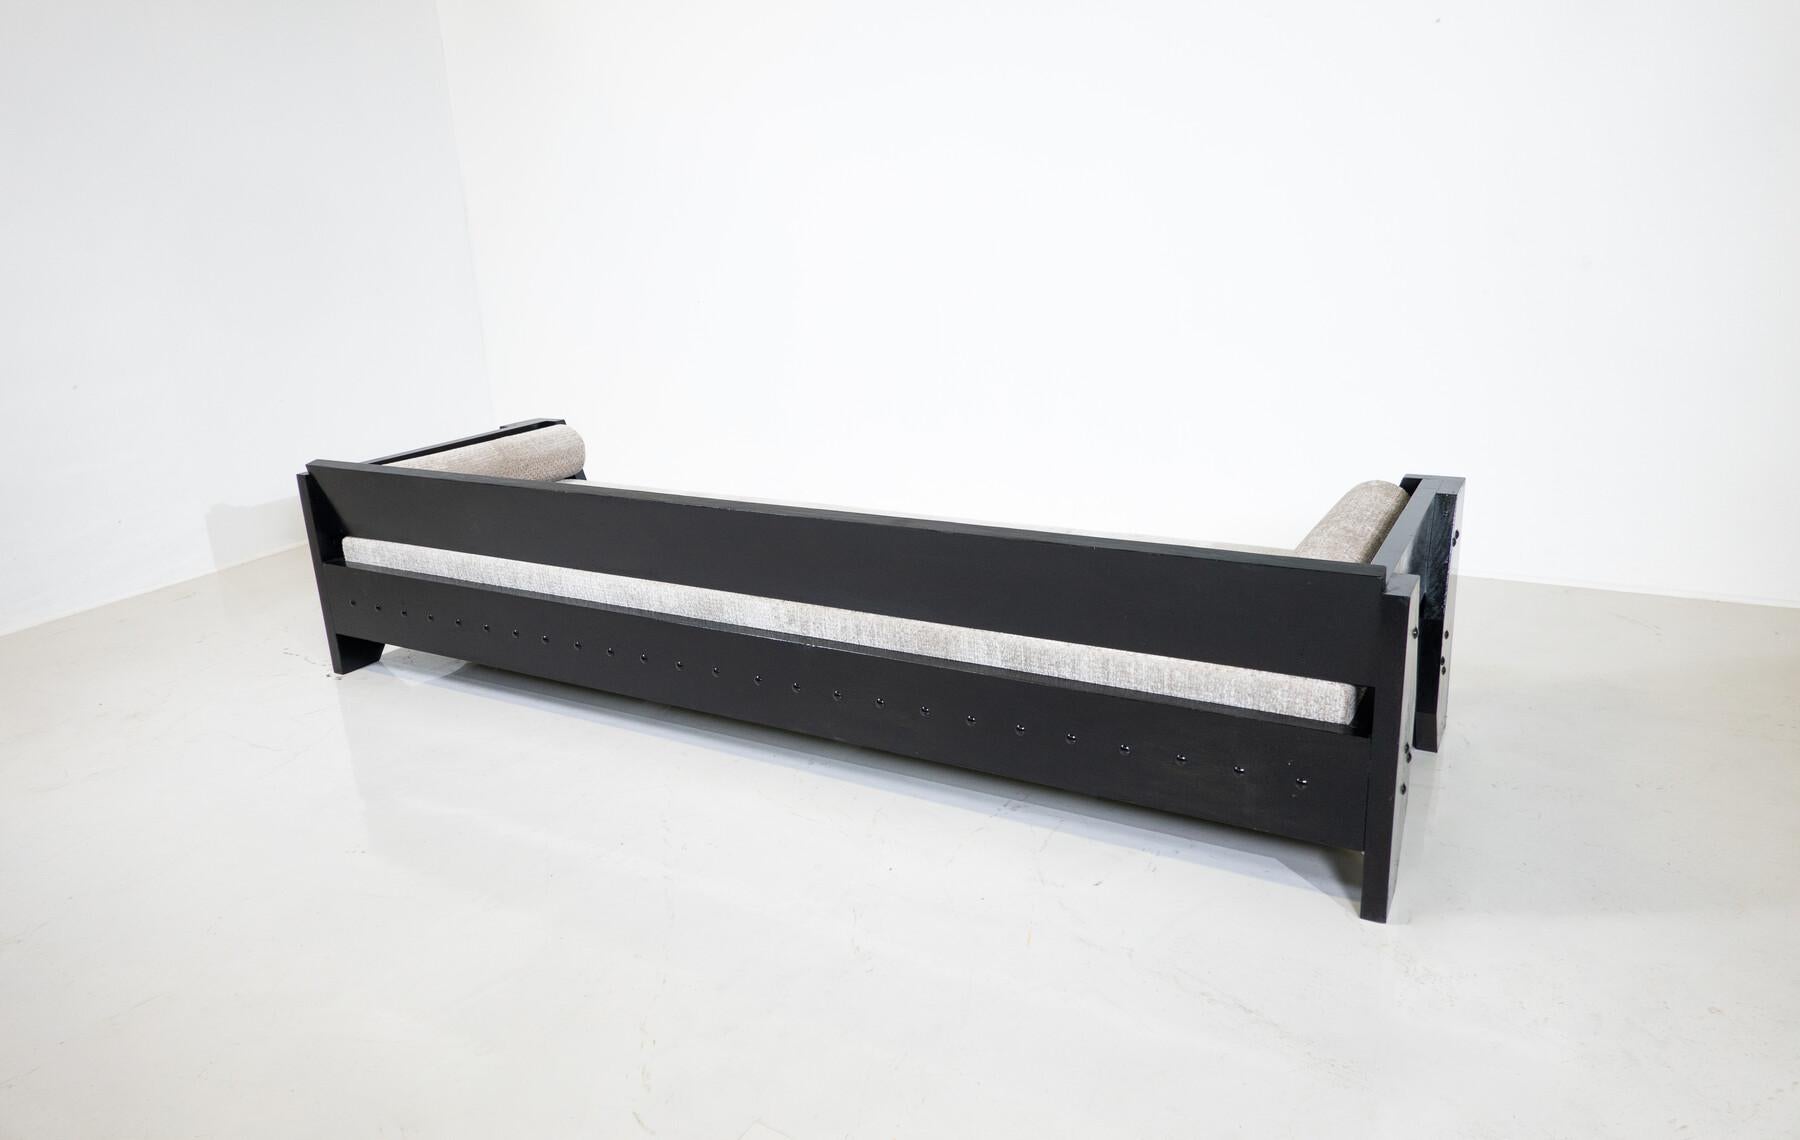 Modernist Sofa / Daybed, Black Wood and Fabric, 1960s For Sale 3